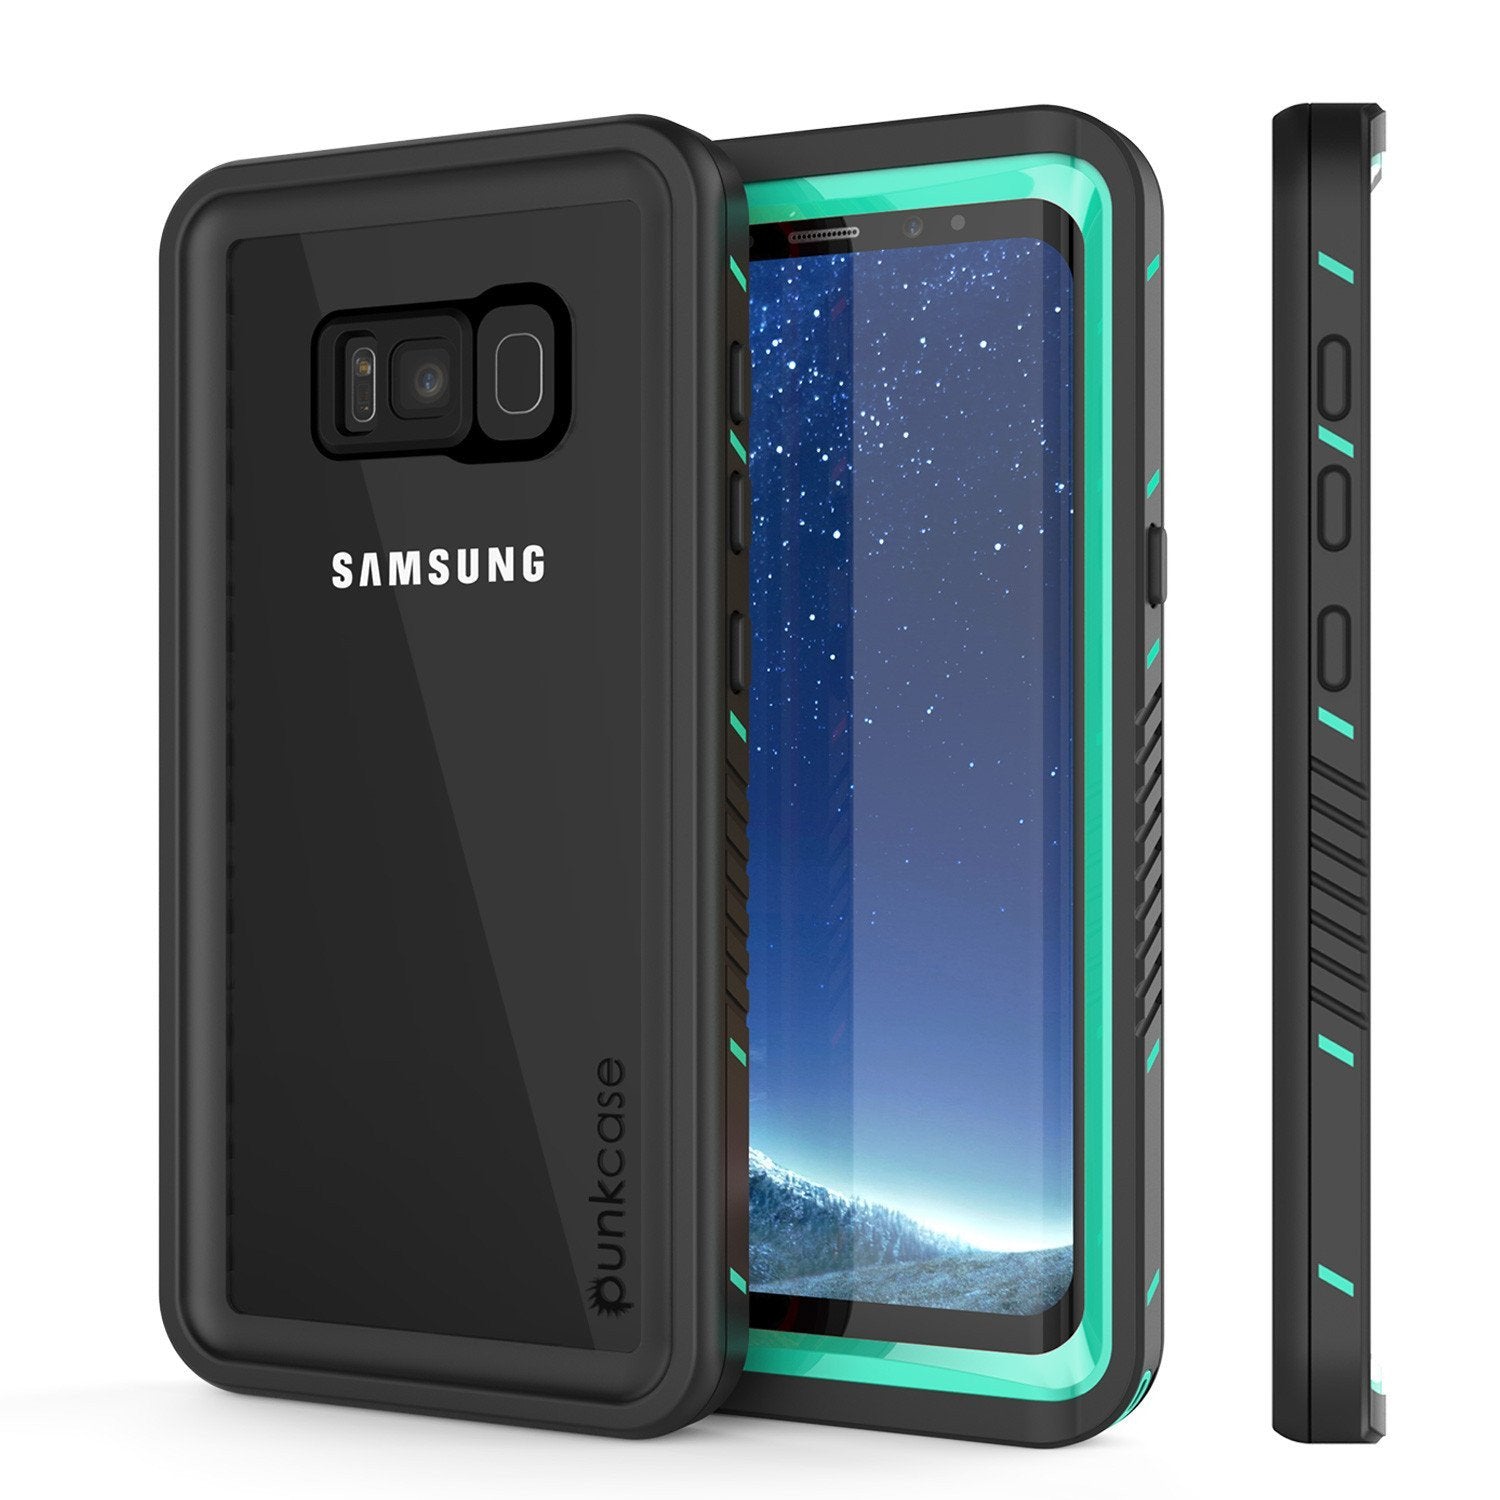 Galaxy S8 Waterproof Case, Punkcase [Extreme Series] [Slim Fit] [IP68 Certified] [Shockproof] [Snowproof] [Dirproof] Armor Cover W/ Built In Screen Protector for Samsung Galaxy S8 [Teal]